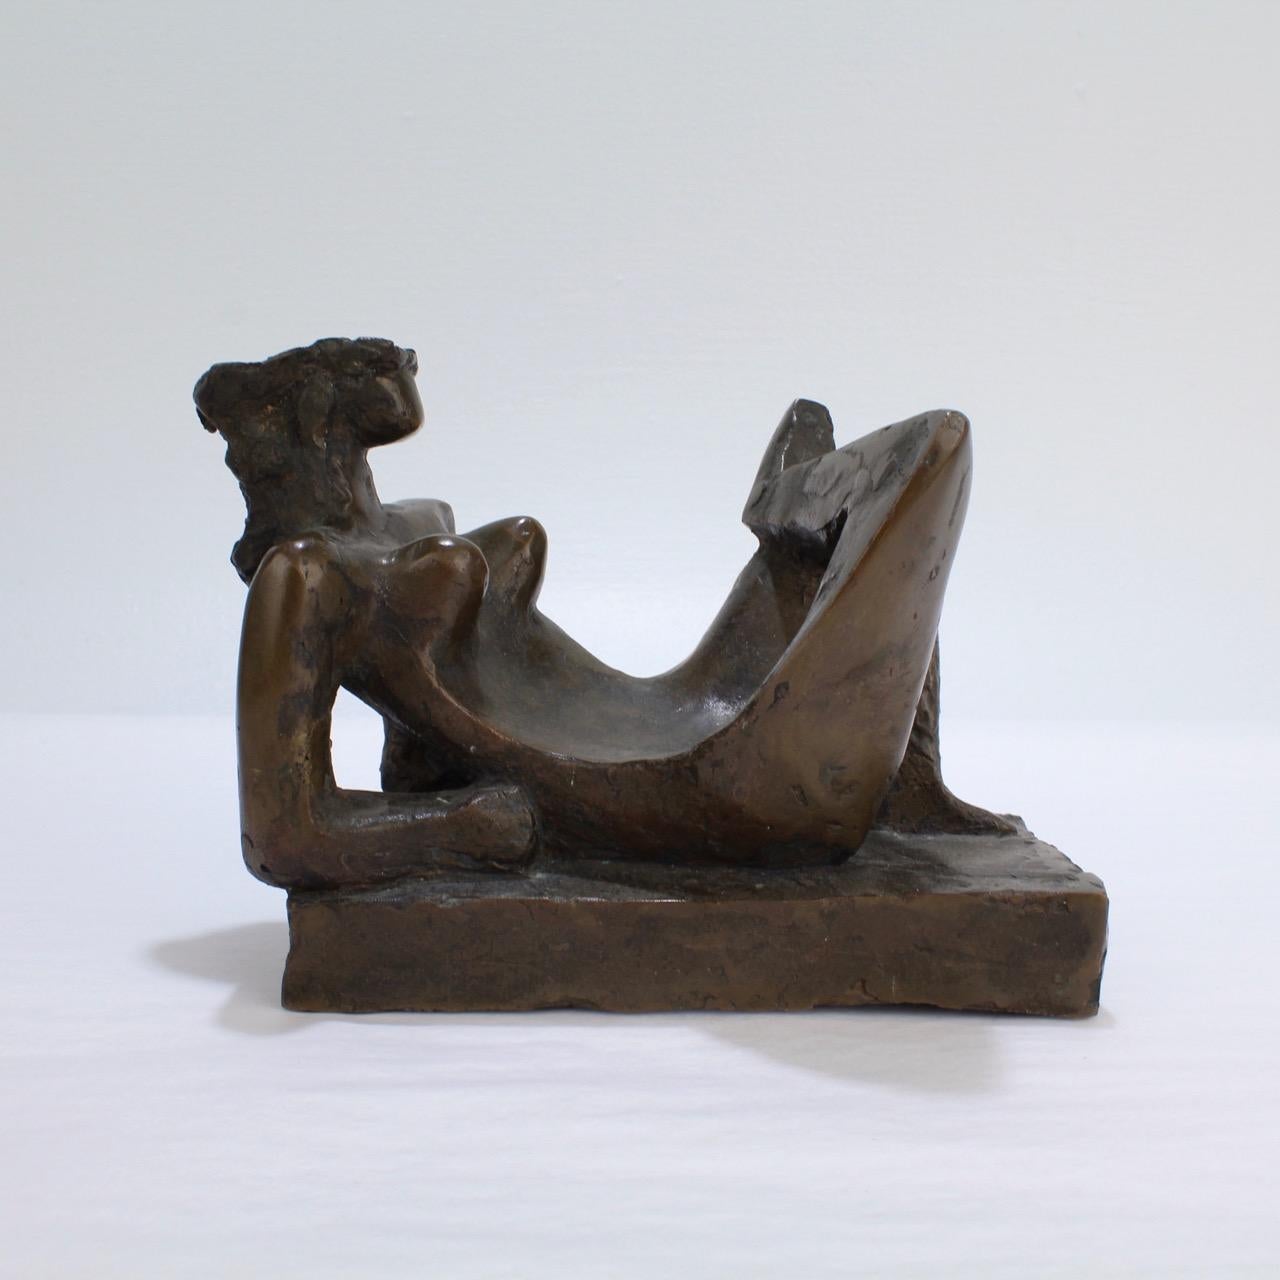 A wonderful stylized mid-century modern nude sculpture of a reclining figure. 

Attributed to Harvey Weiss (1922-2007 - New York). 

Acquired from the estate of Harvey Weiss' sister-in-law and by repute a gift from the artist.

The figure